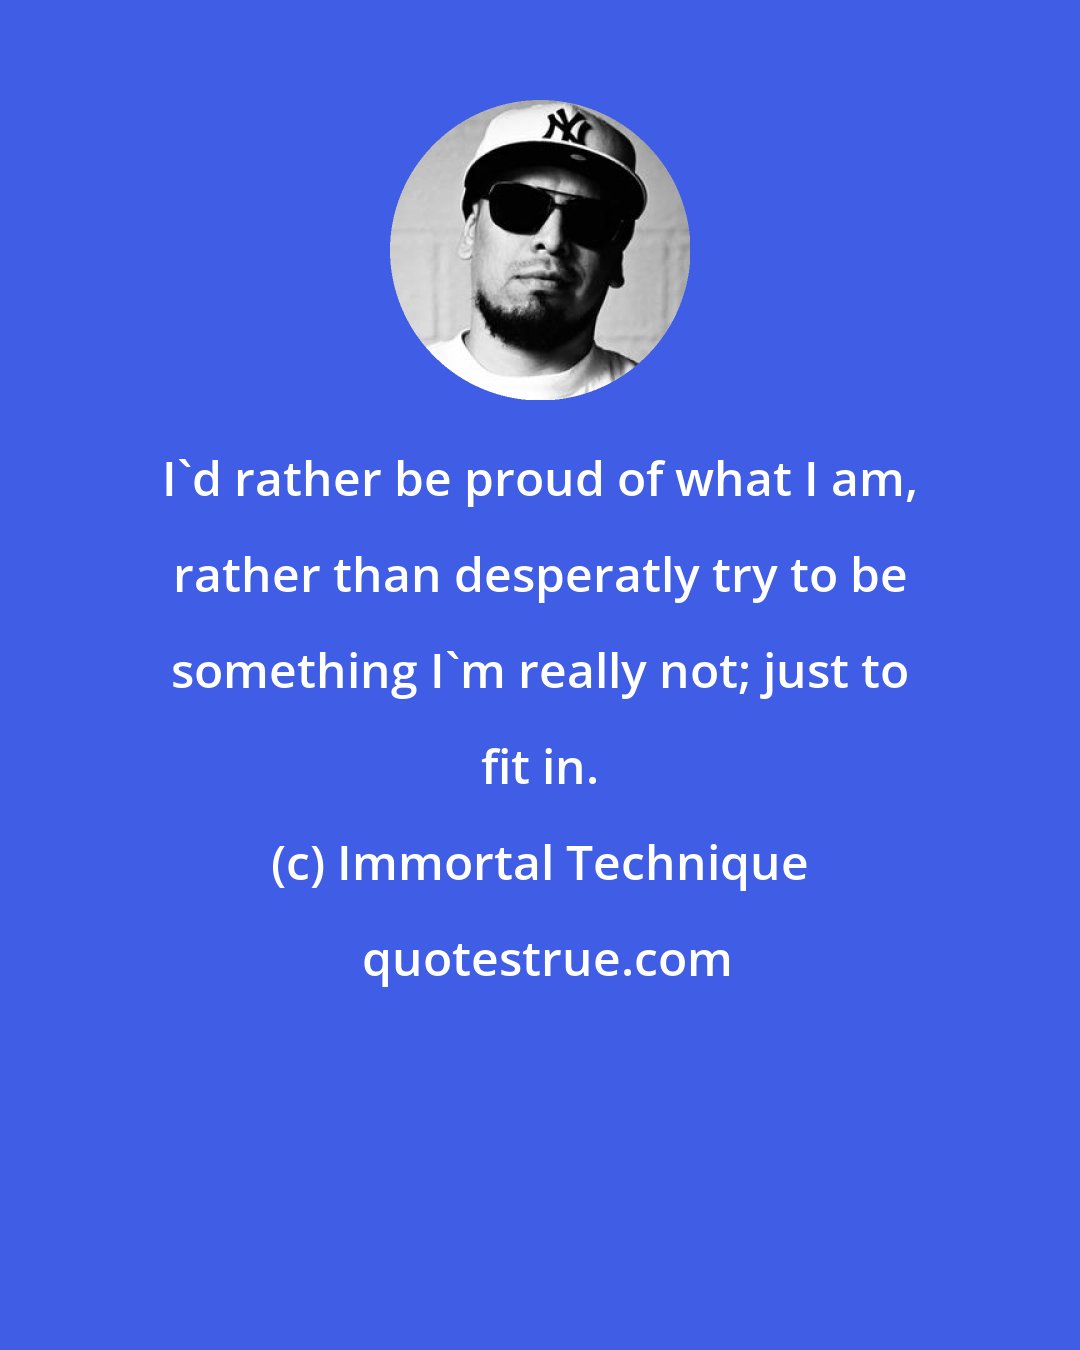 Immortal Technique: I'd rather be proud of what I am, rather than desperatly try to be something I'm really not; just to fit in.